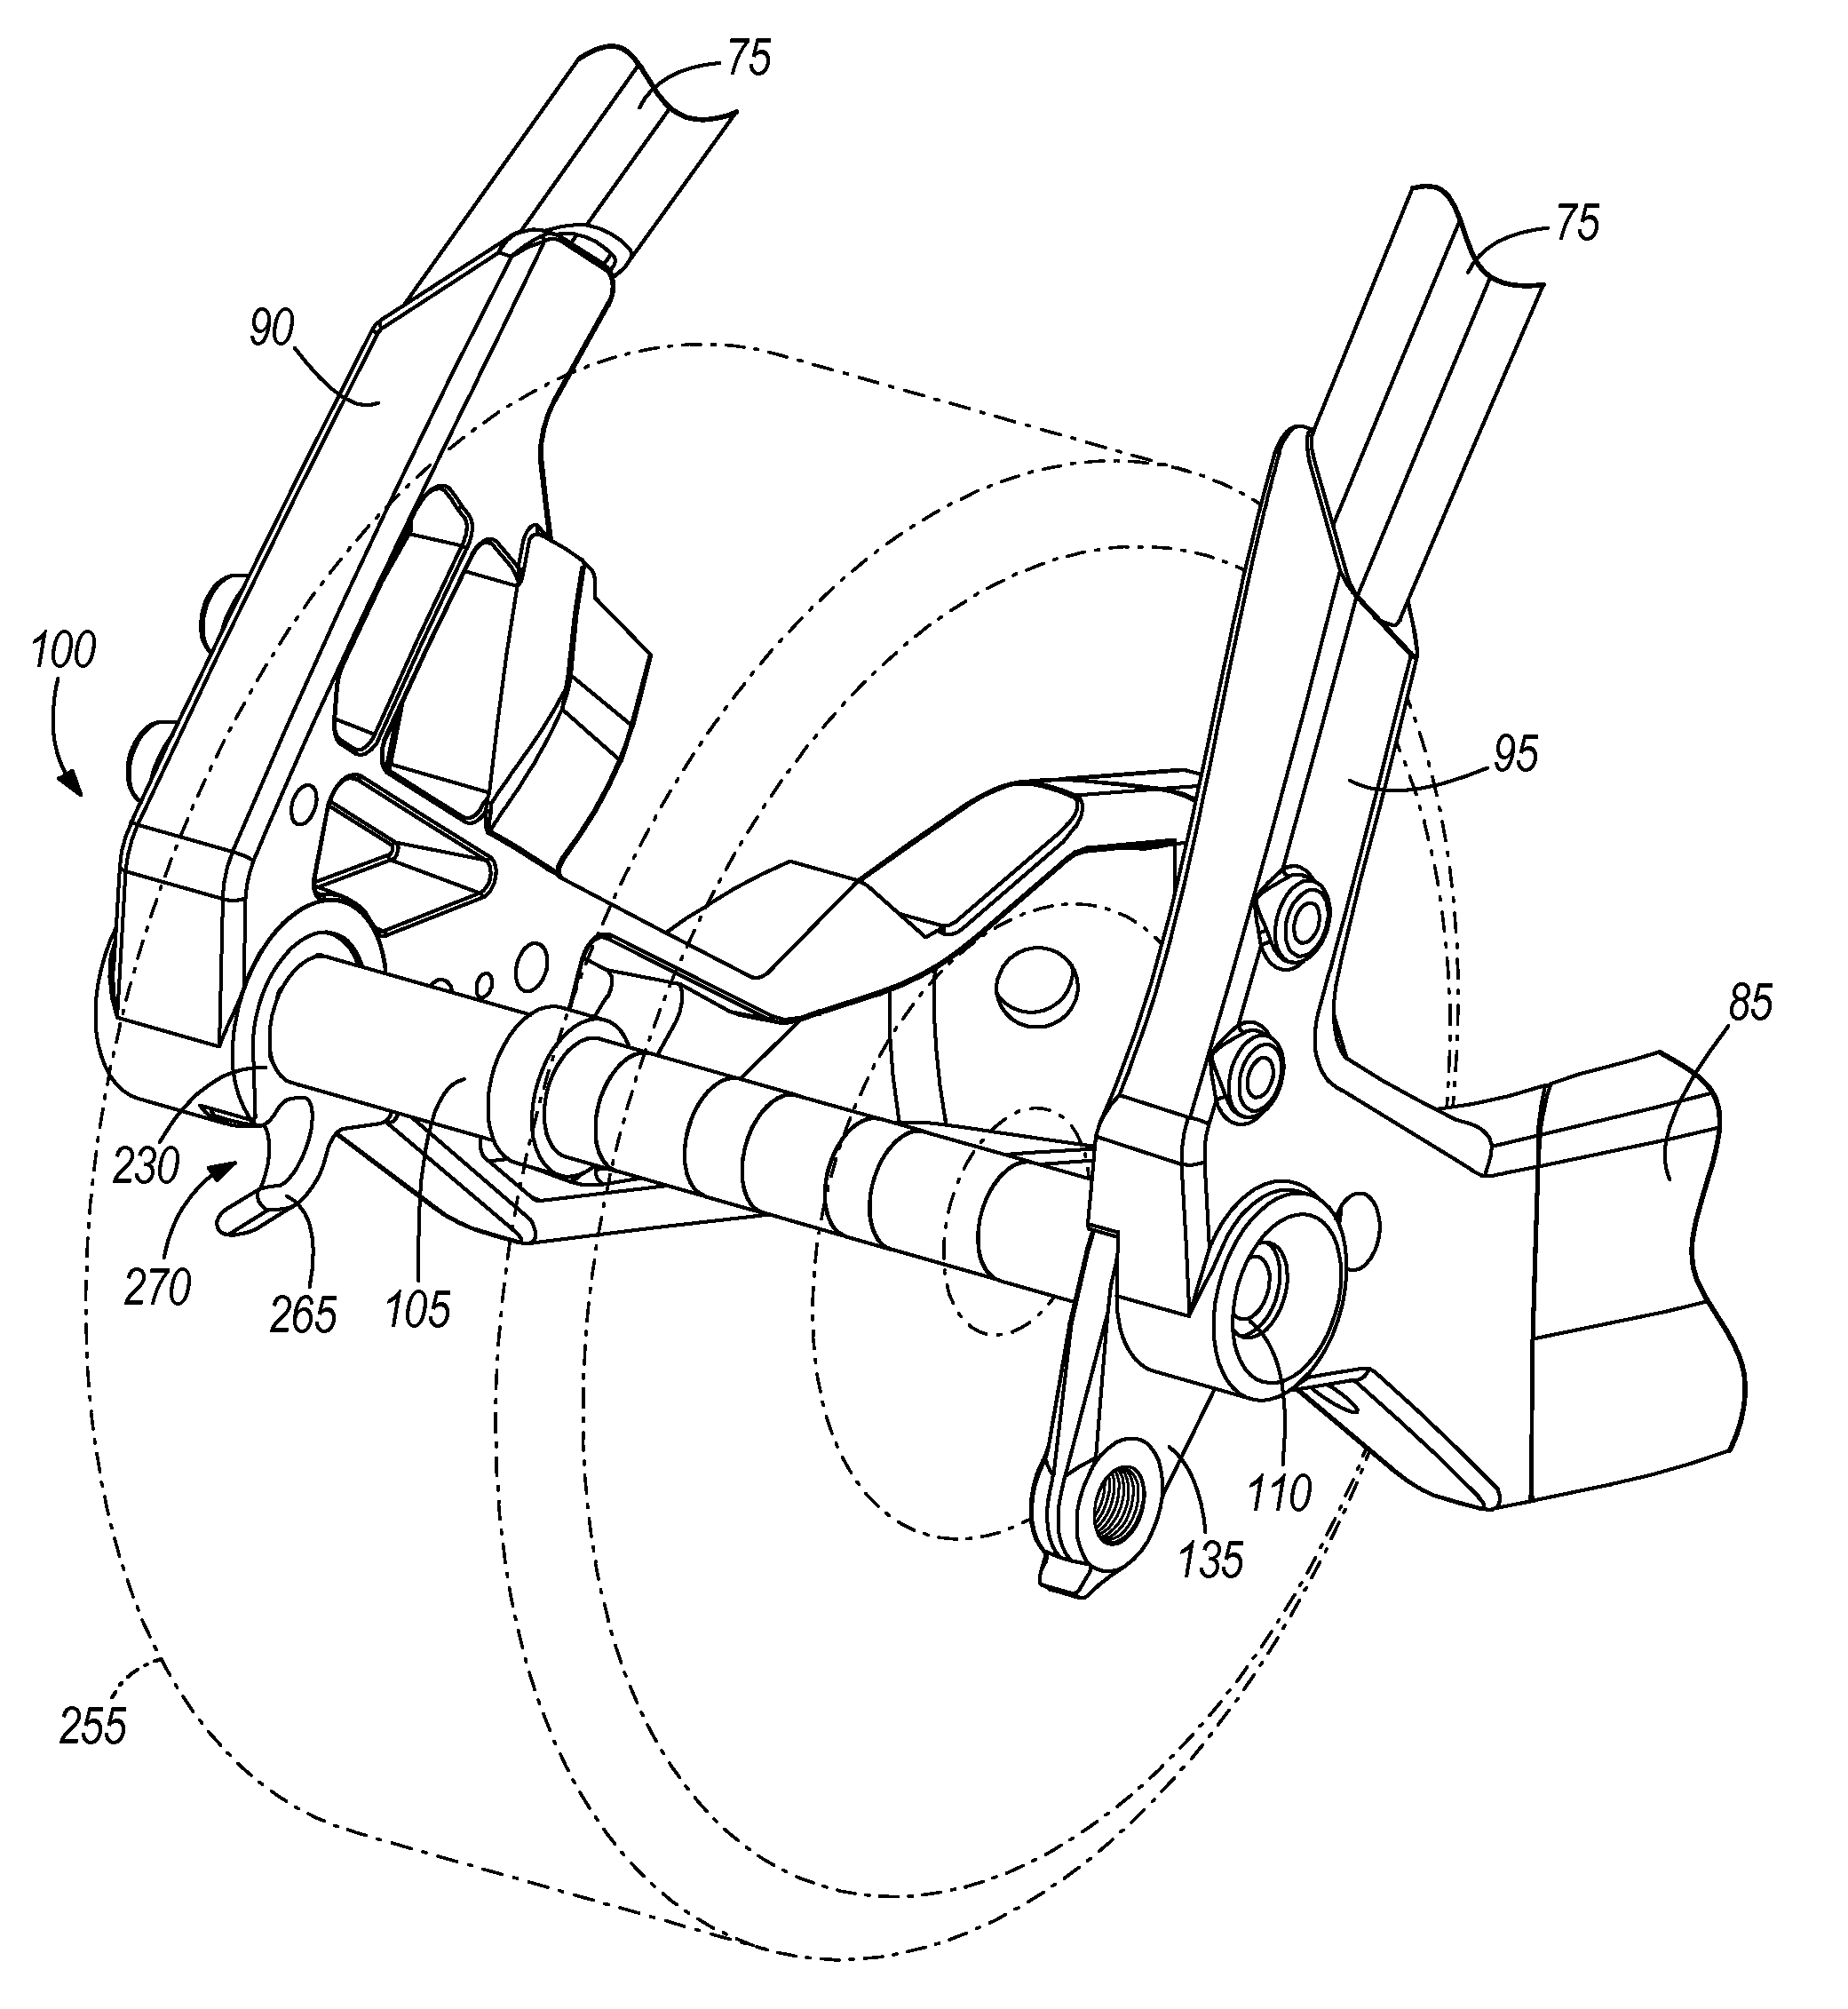 Torque element for a motor-driven bicycle